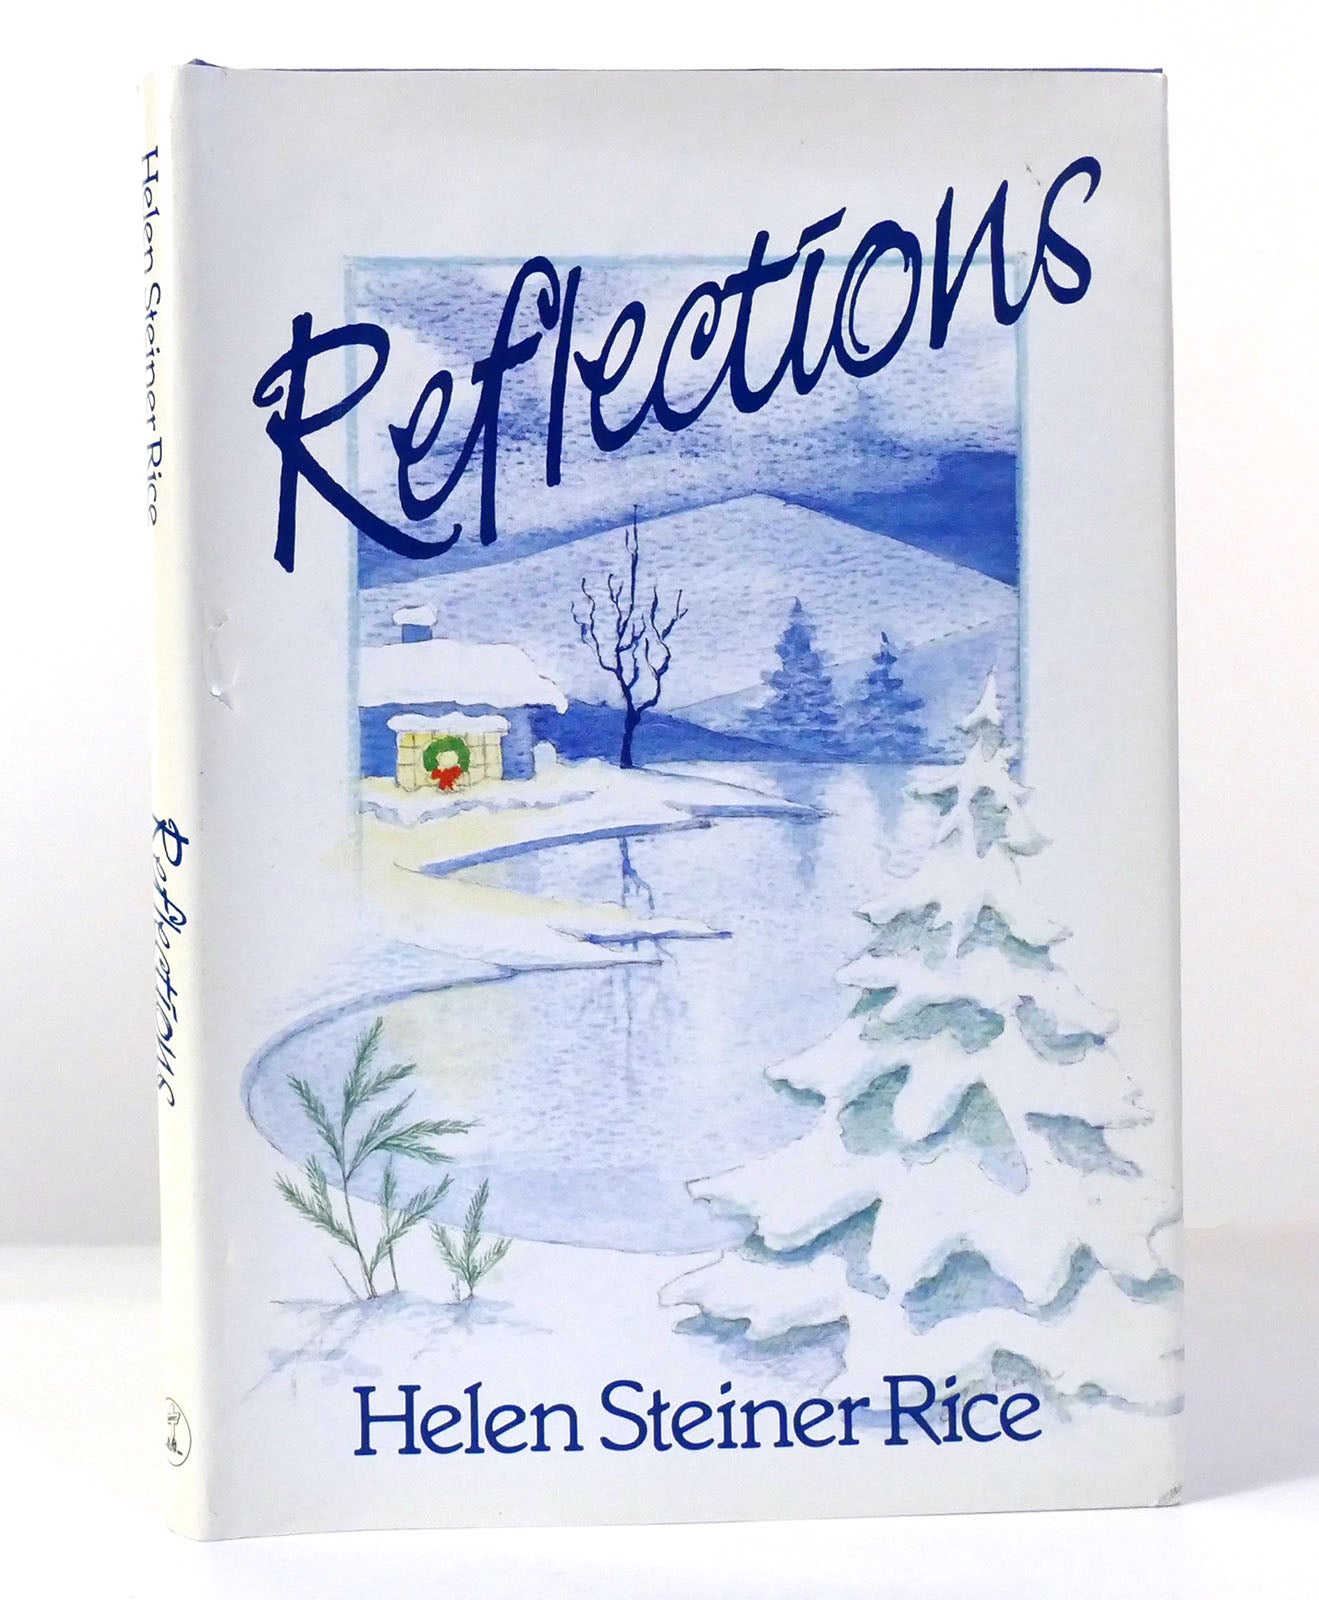 DAILY REFLECTIONS Helen Steiner Rice First Edition Thus; First Printing